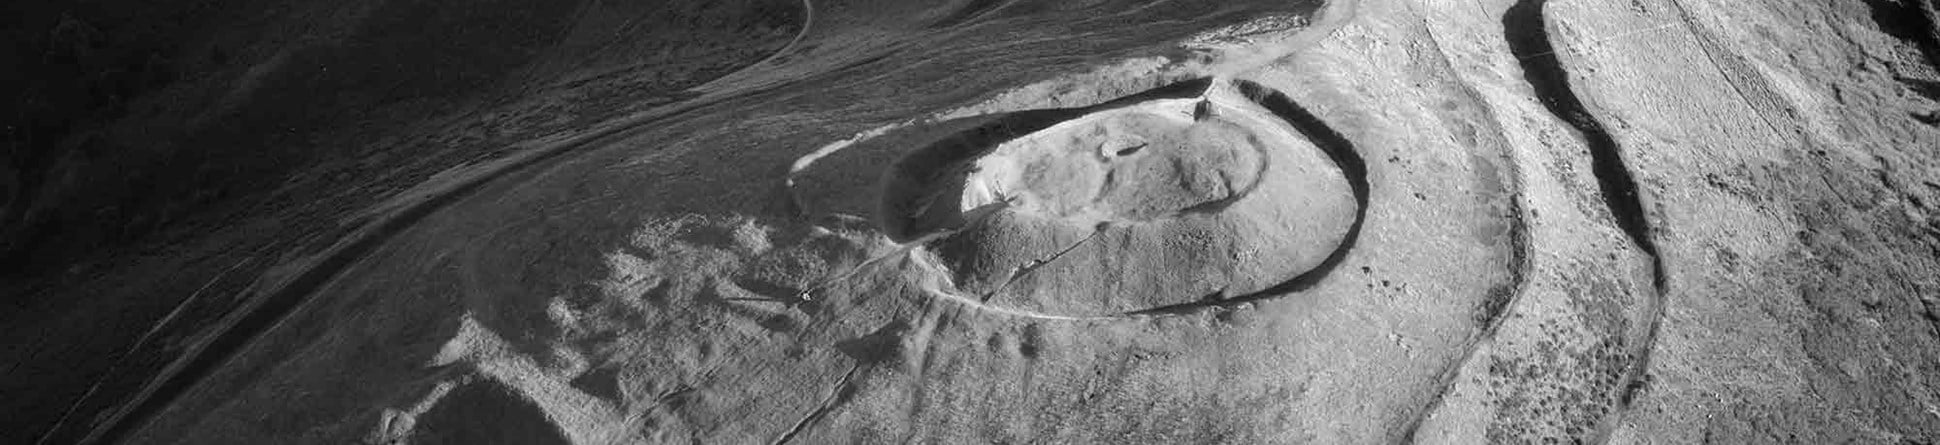 Black and white oblique aerial photograph of a univallate Iron Age hillfort, photographed in low sunlight that casts strong shadows, revealing banks, ditches and tracks surrounding a central, circular mound. The hillside drops steeply to the foreground and either side of the narrow spine of the hill.